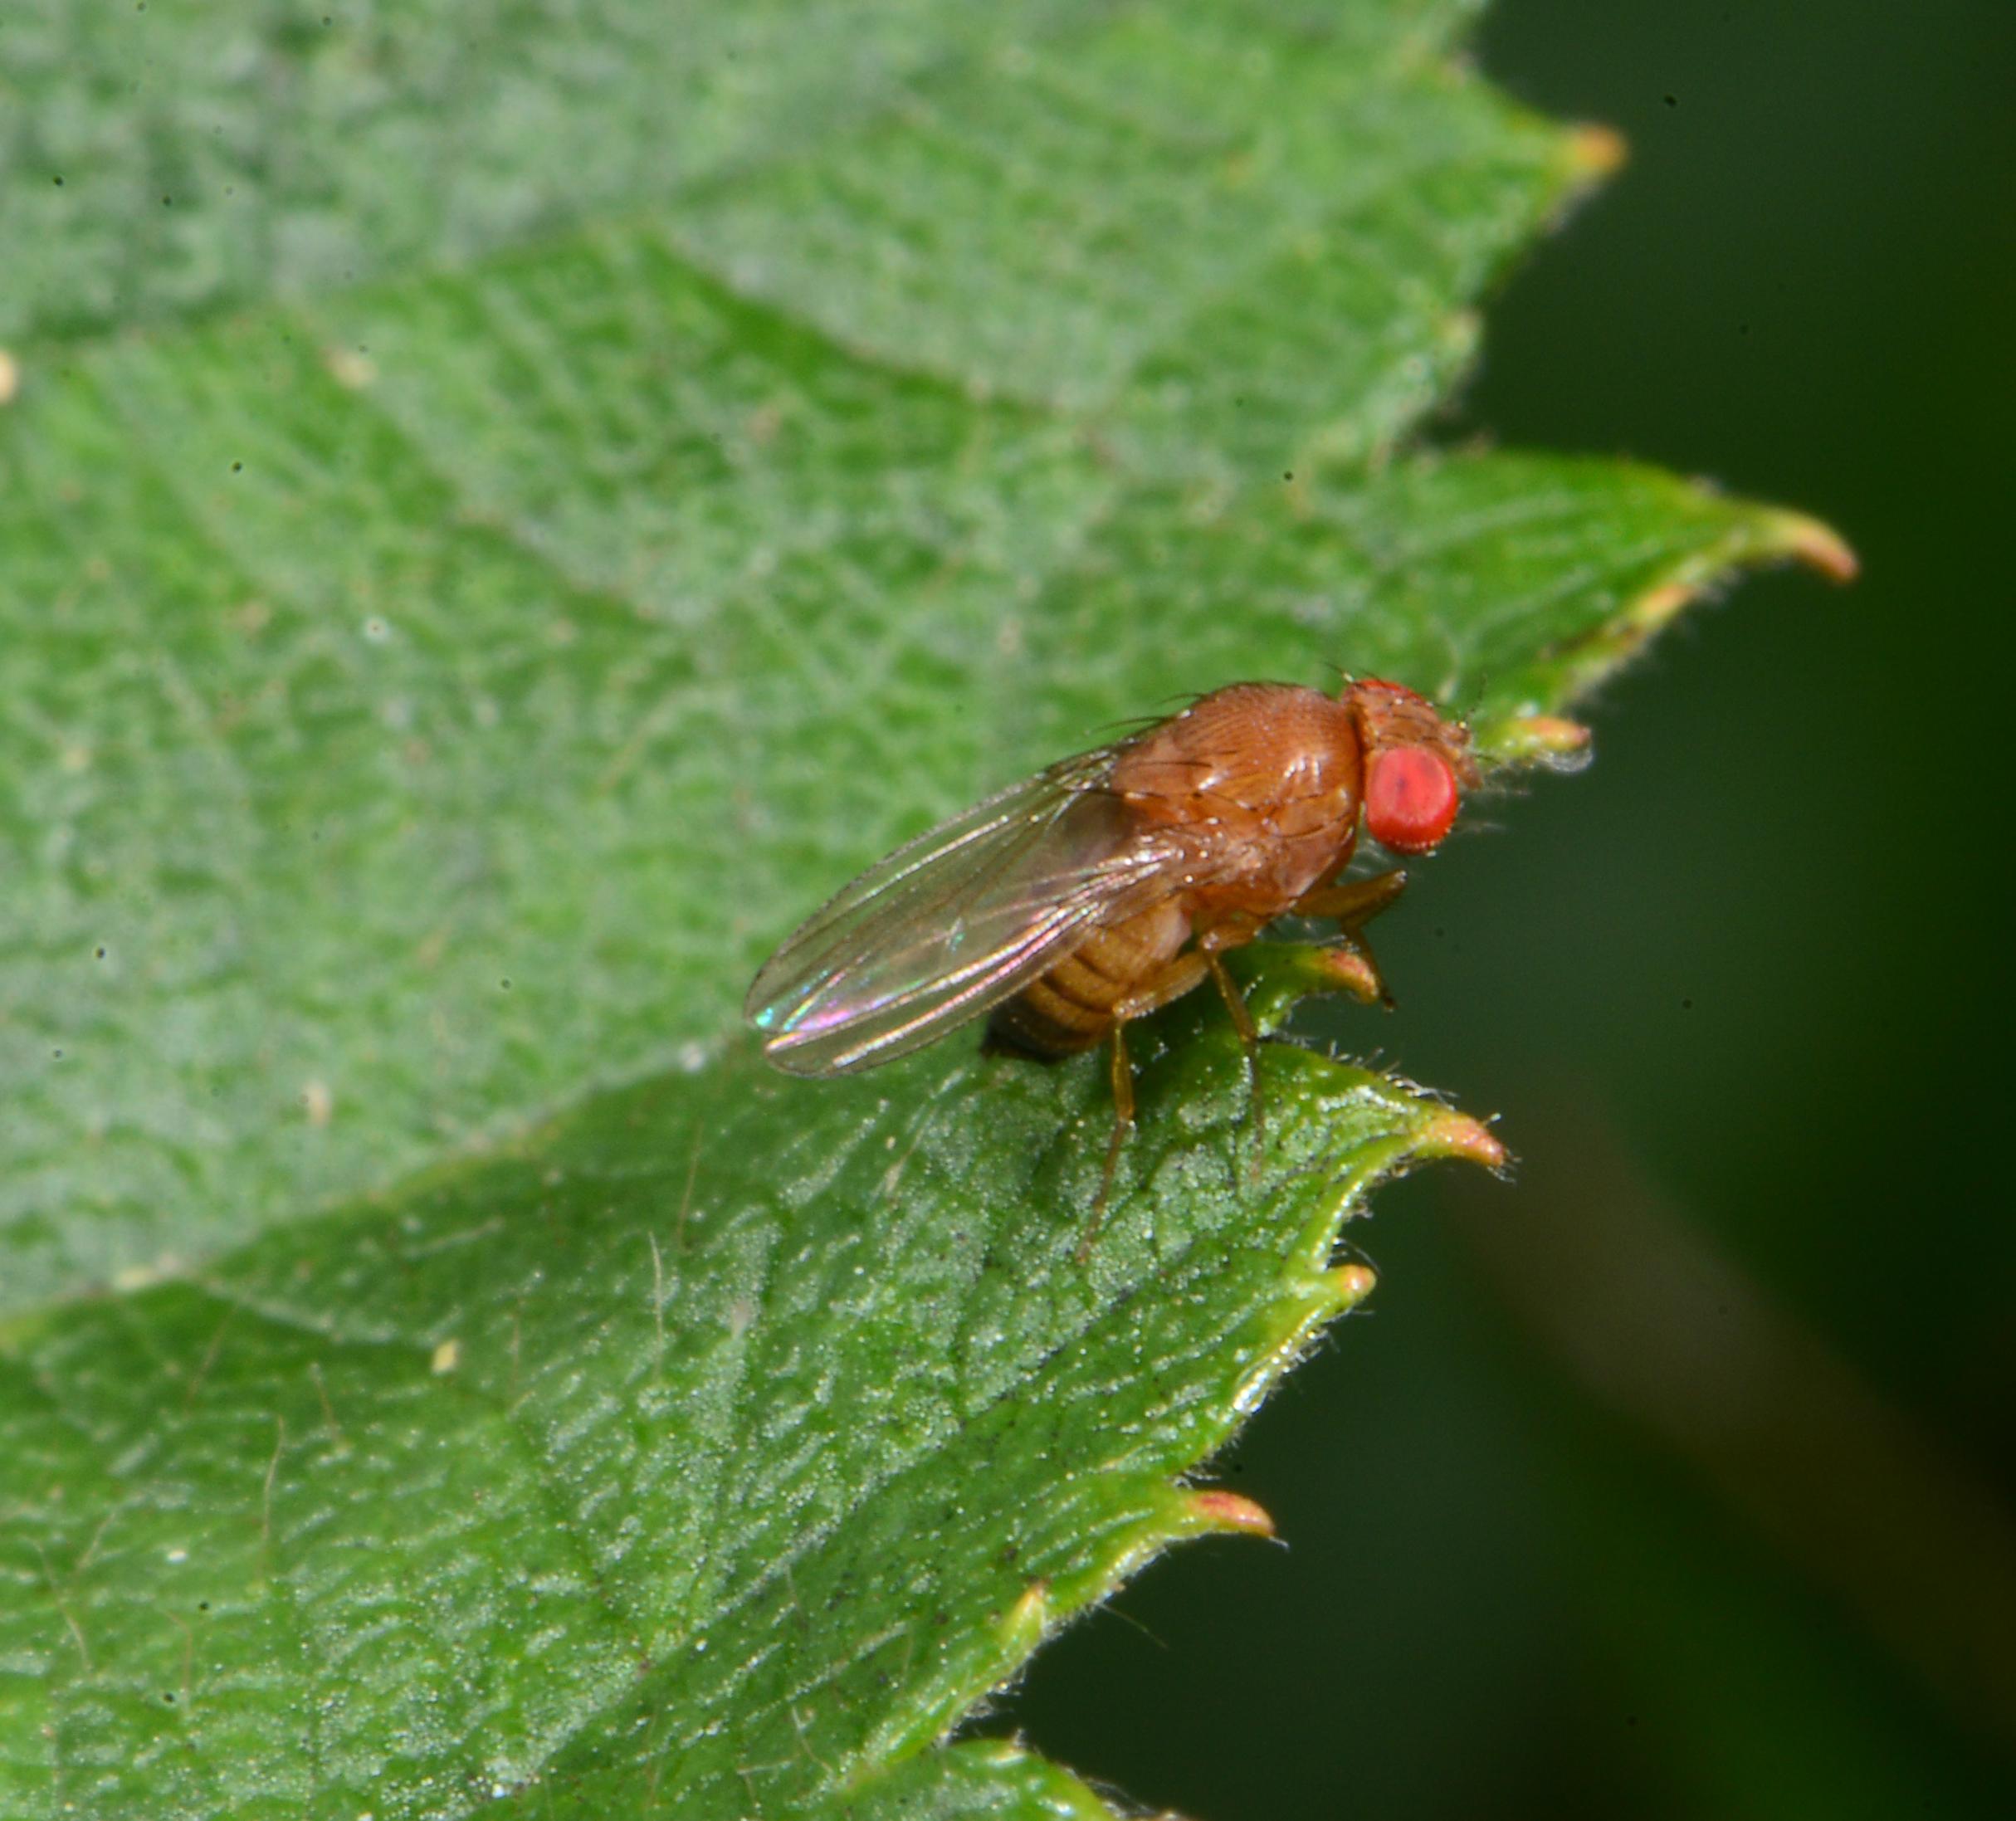 Spotted wing drosophila (Photo: Ric Bessin, UKY)